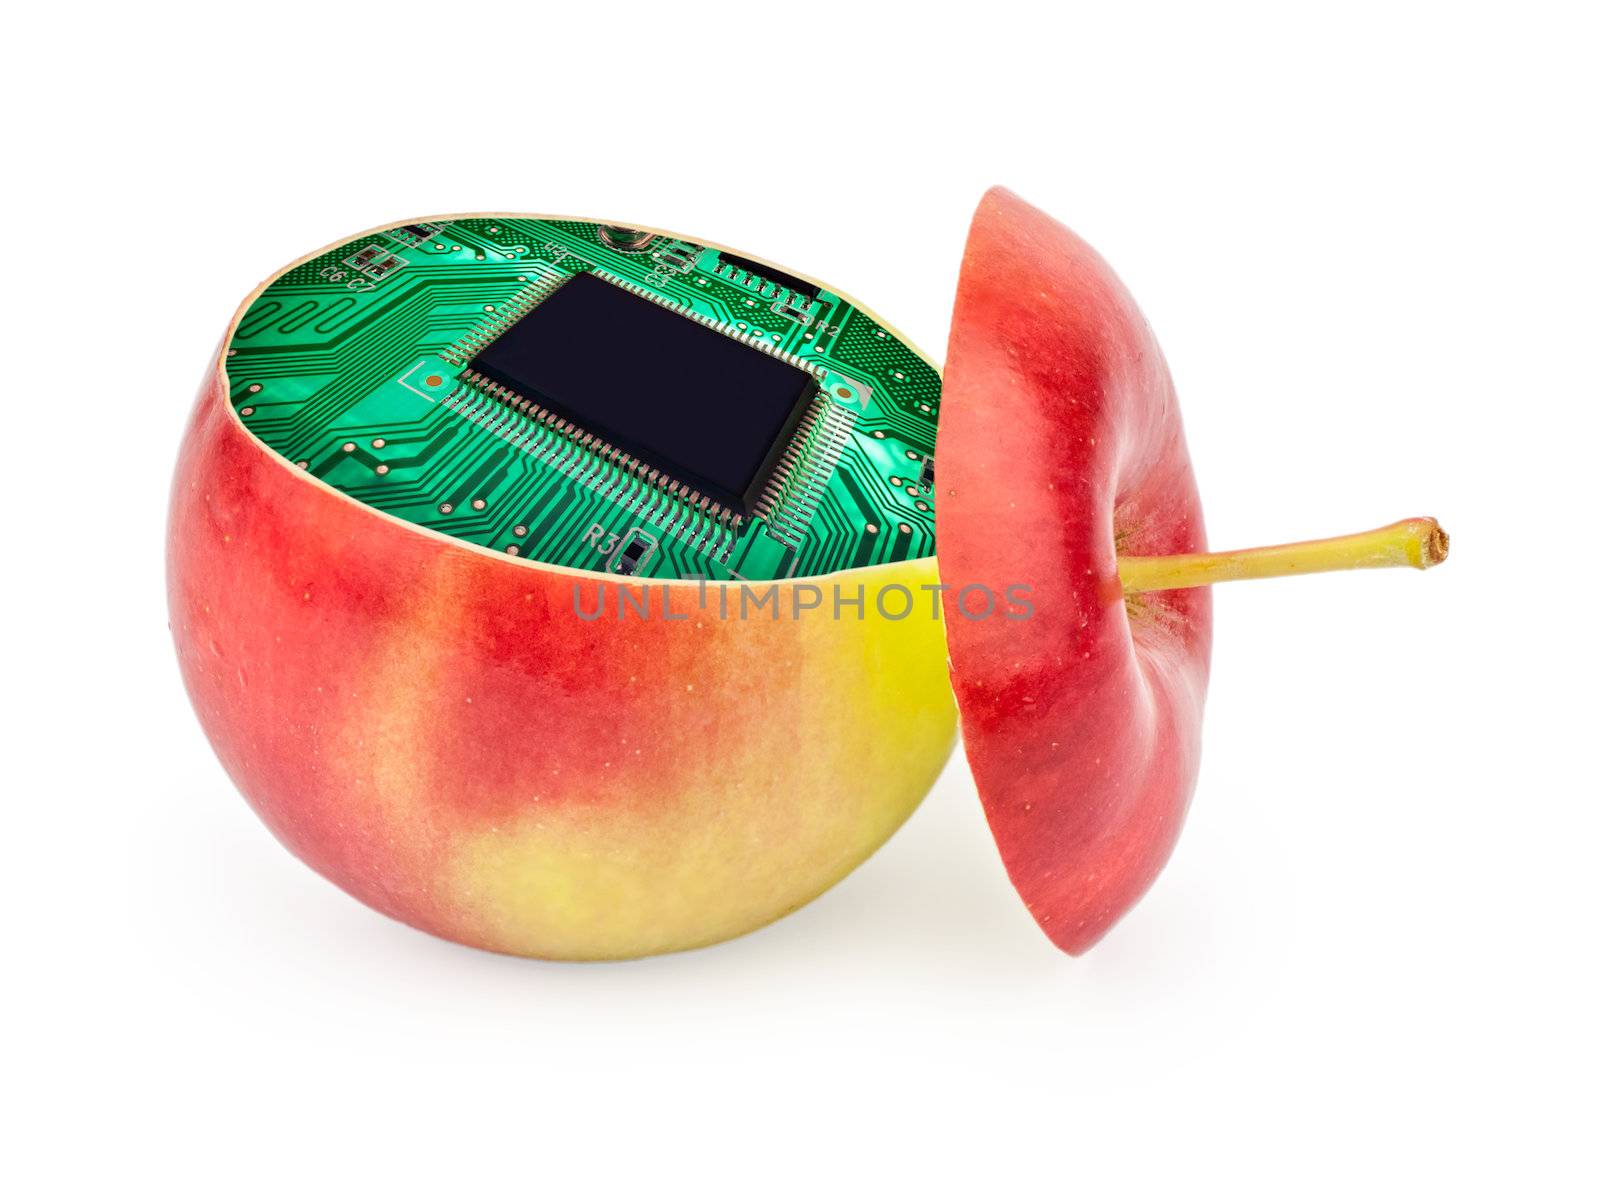 cut apple inside with electronic circuit